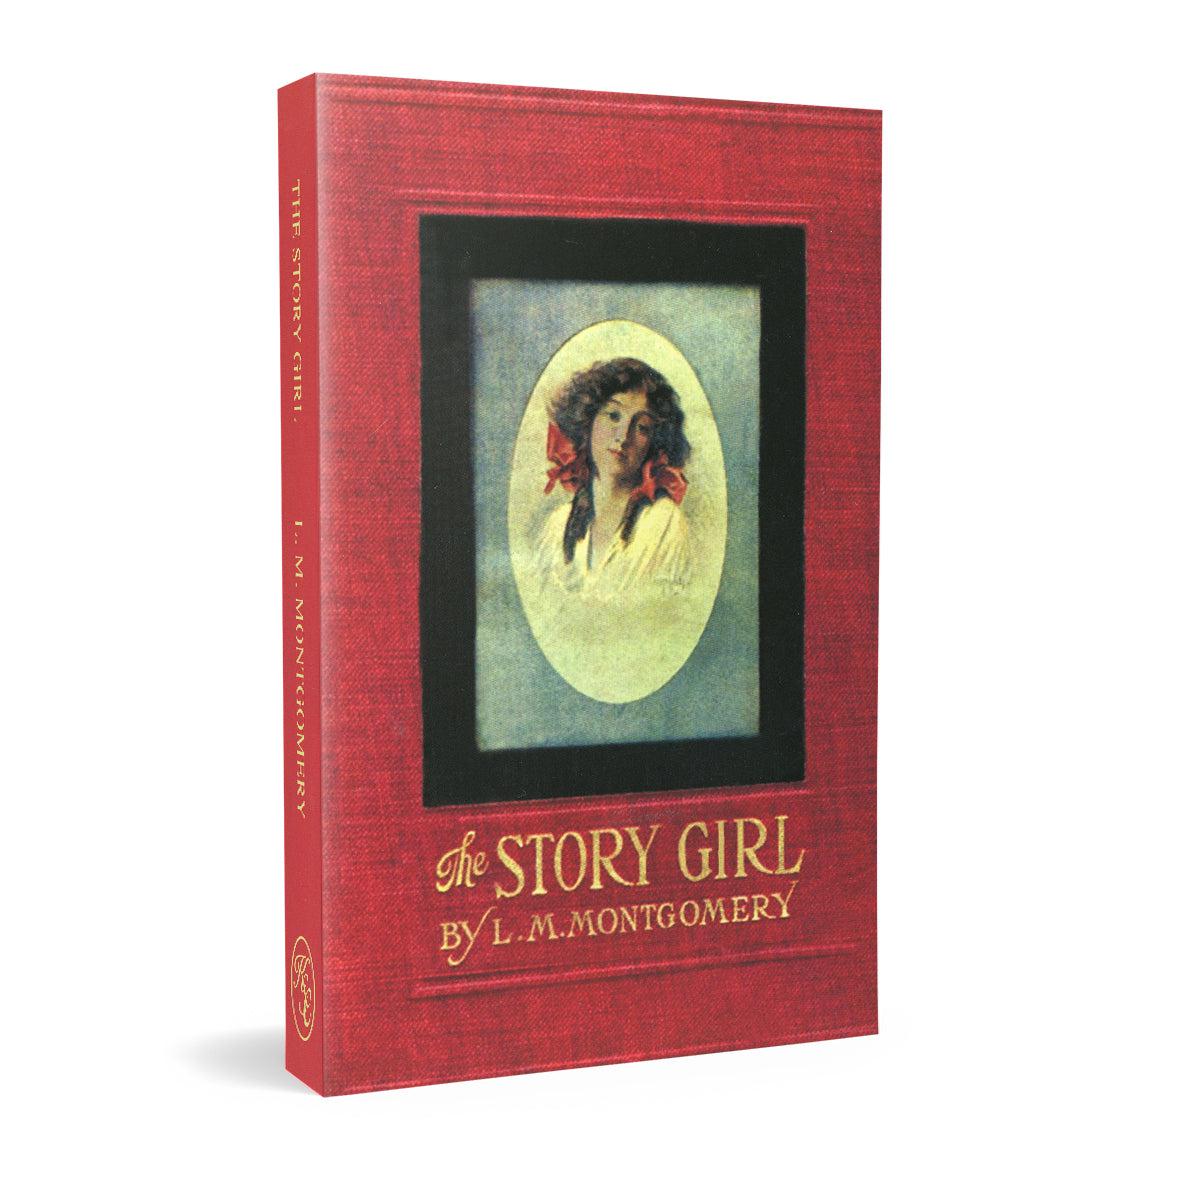 "The Story Girl" Novel - L.C. Page & Company, Boston 1911 Reproduction Edition